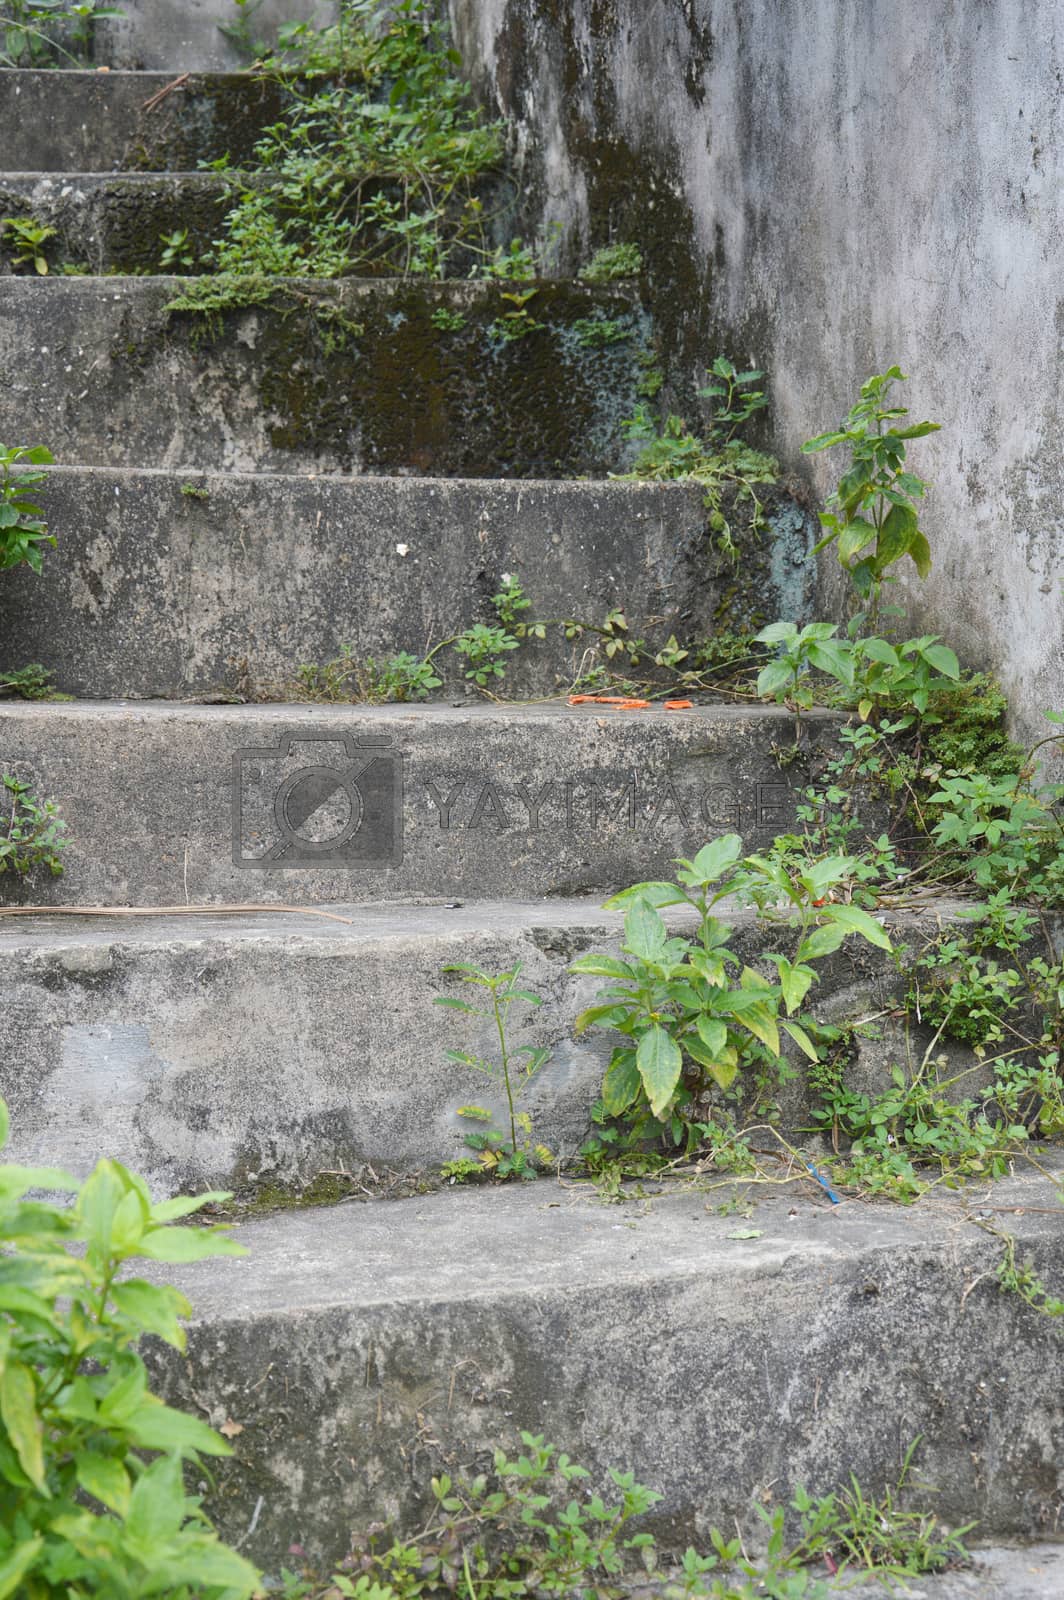 Royalty free image of concrete stairs slick and mossy by antonihalim